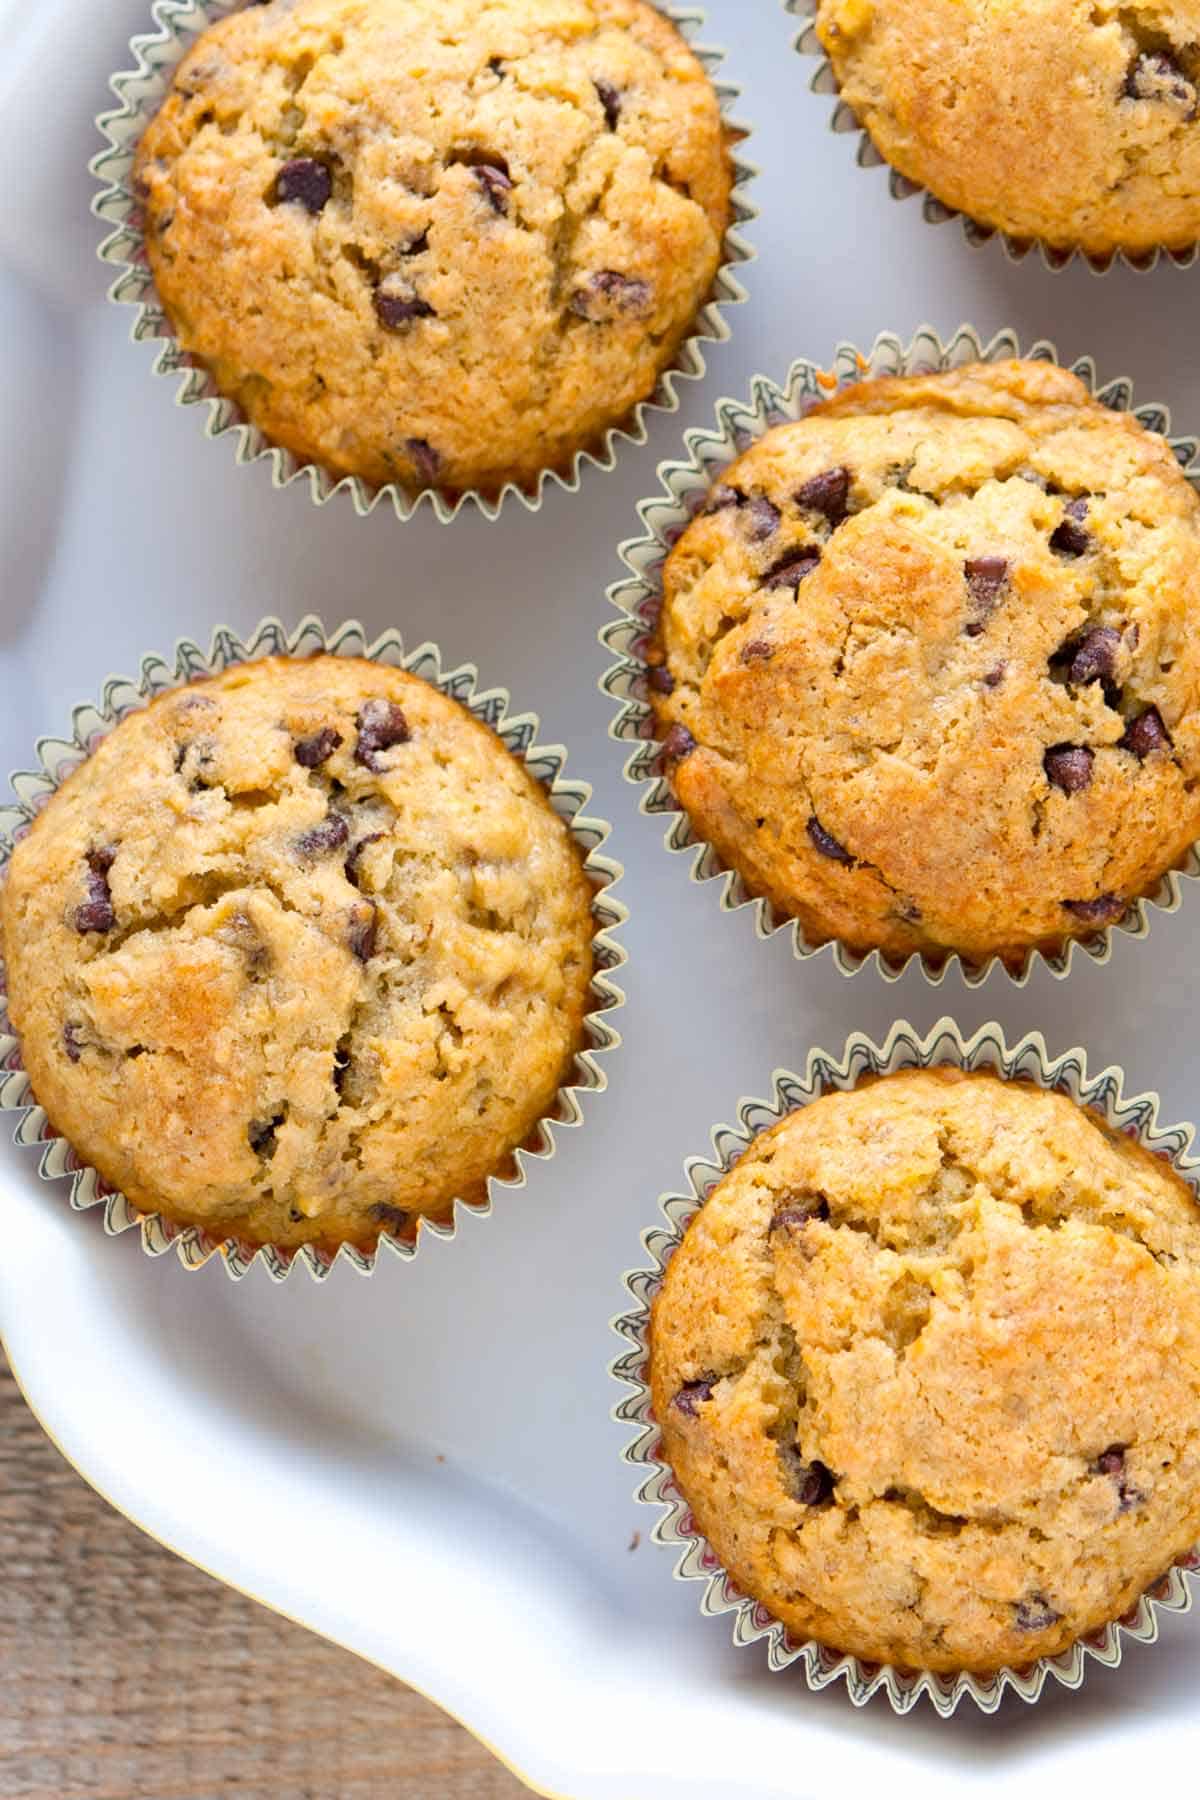 Easy Banana Muffins With Chocolate Chips,Mojito Recipe